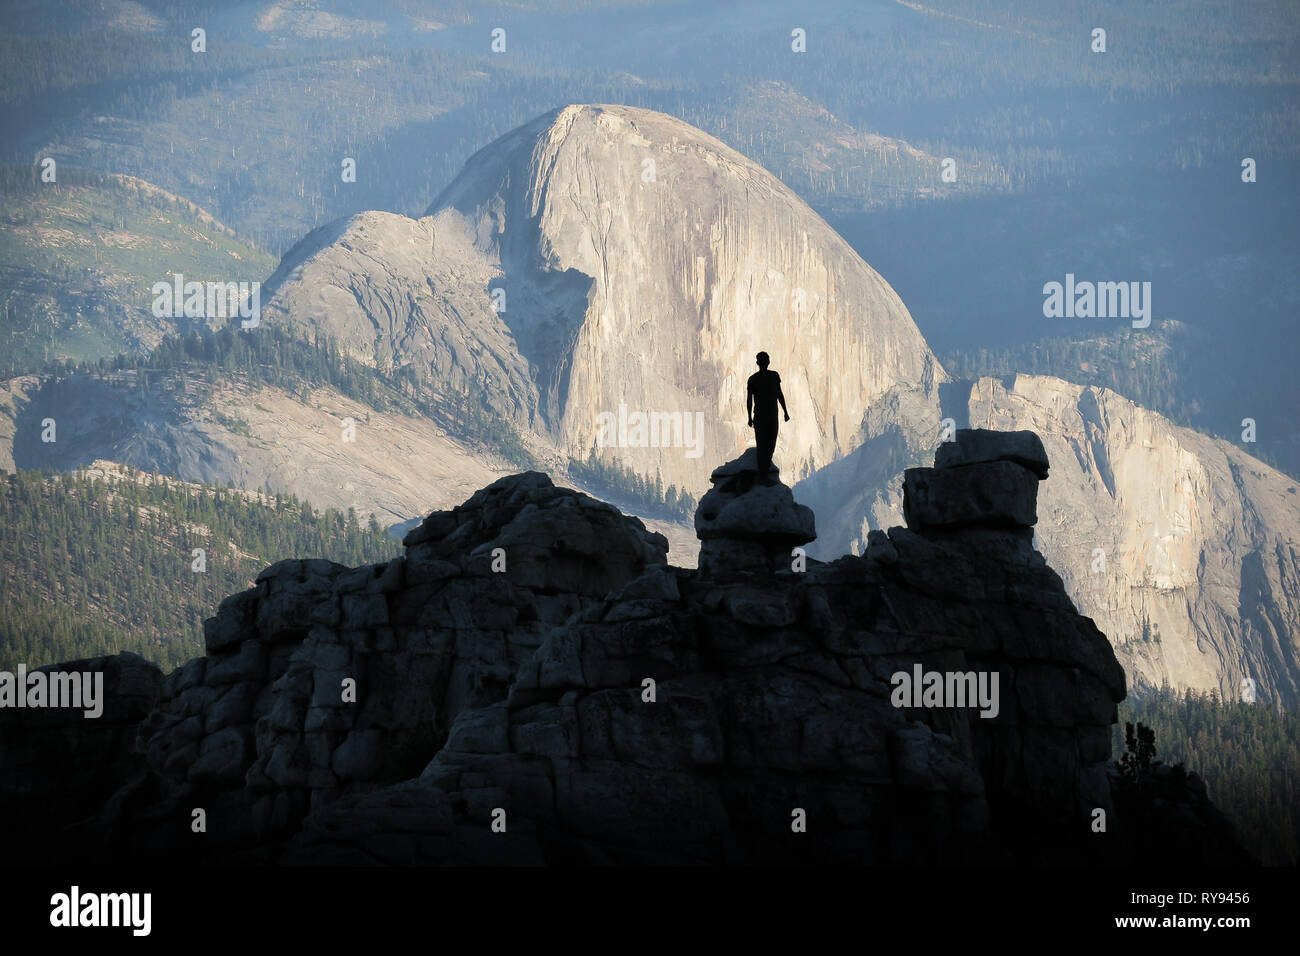 Rock Climber Man Silhouette With Half Dome Afternoon Light - Yosemite National Park, California Stock Photo